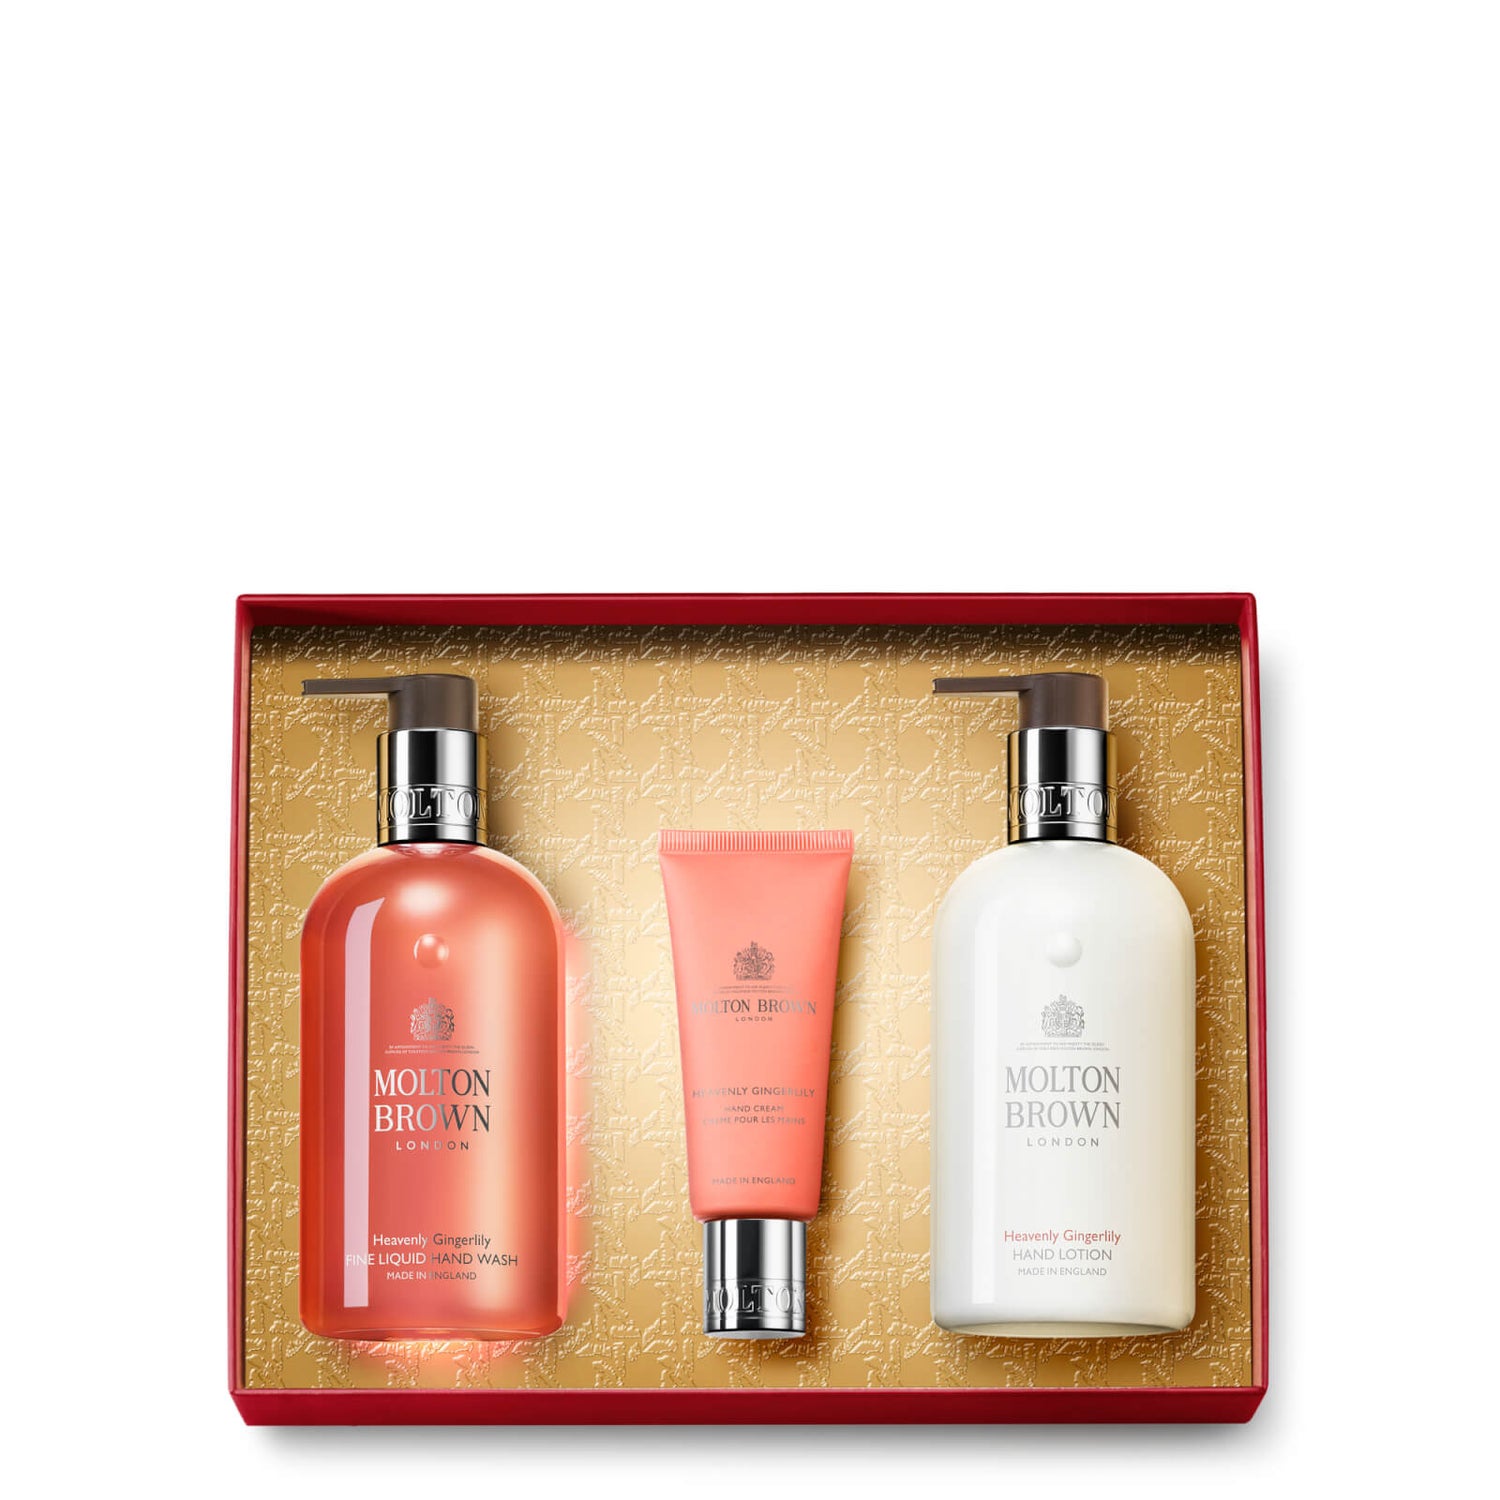 Molton Brown Heavenly Gingerlily Hand Care Gift Set